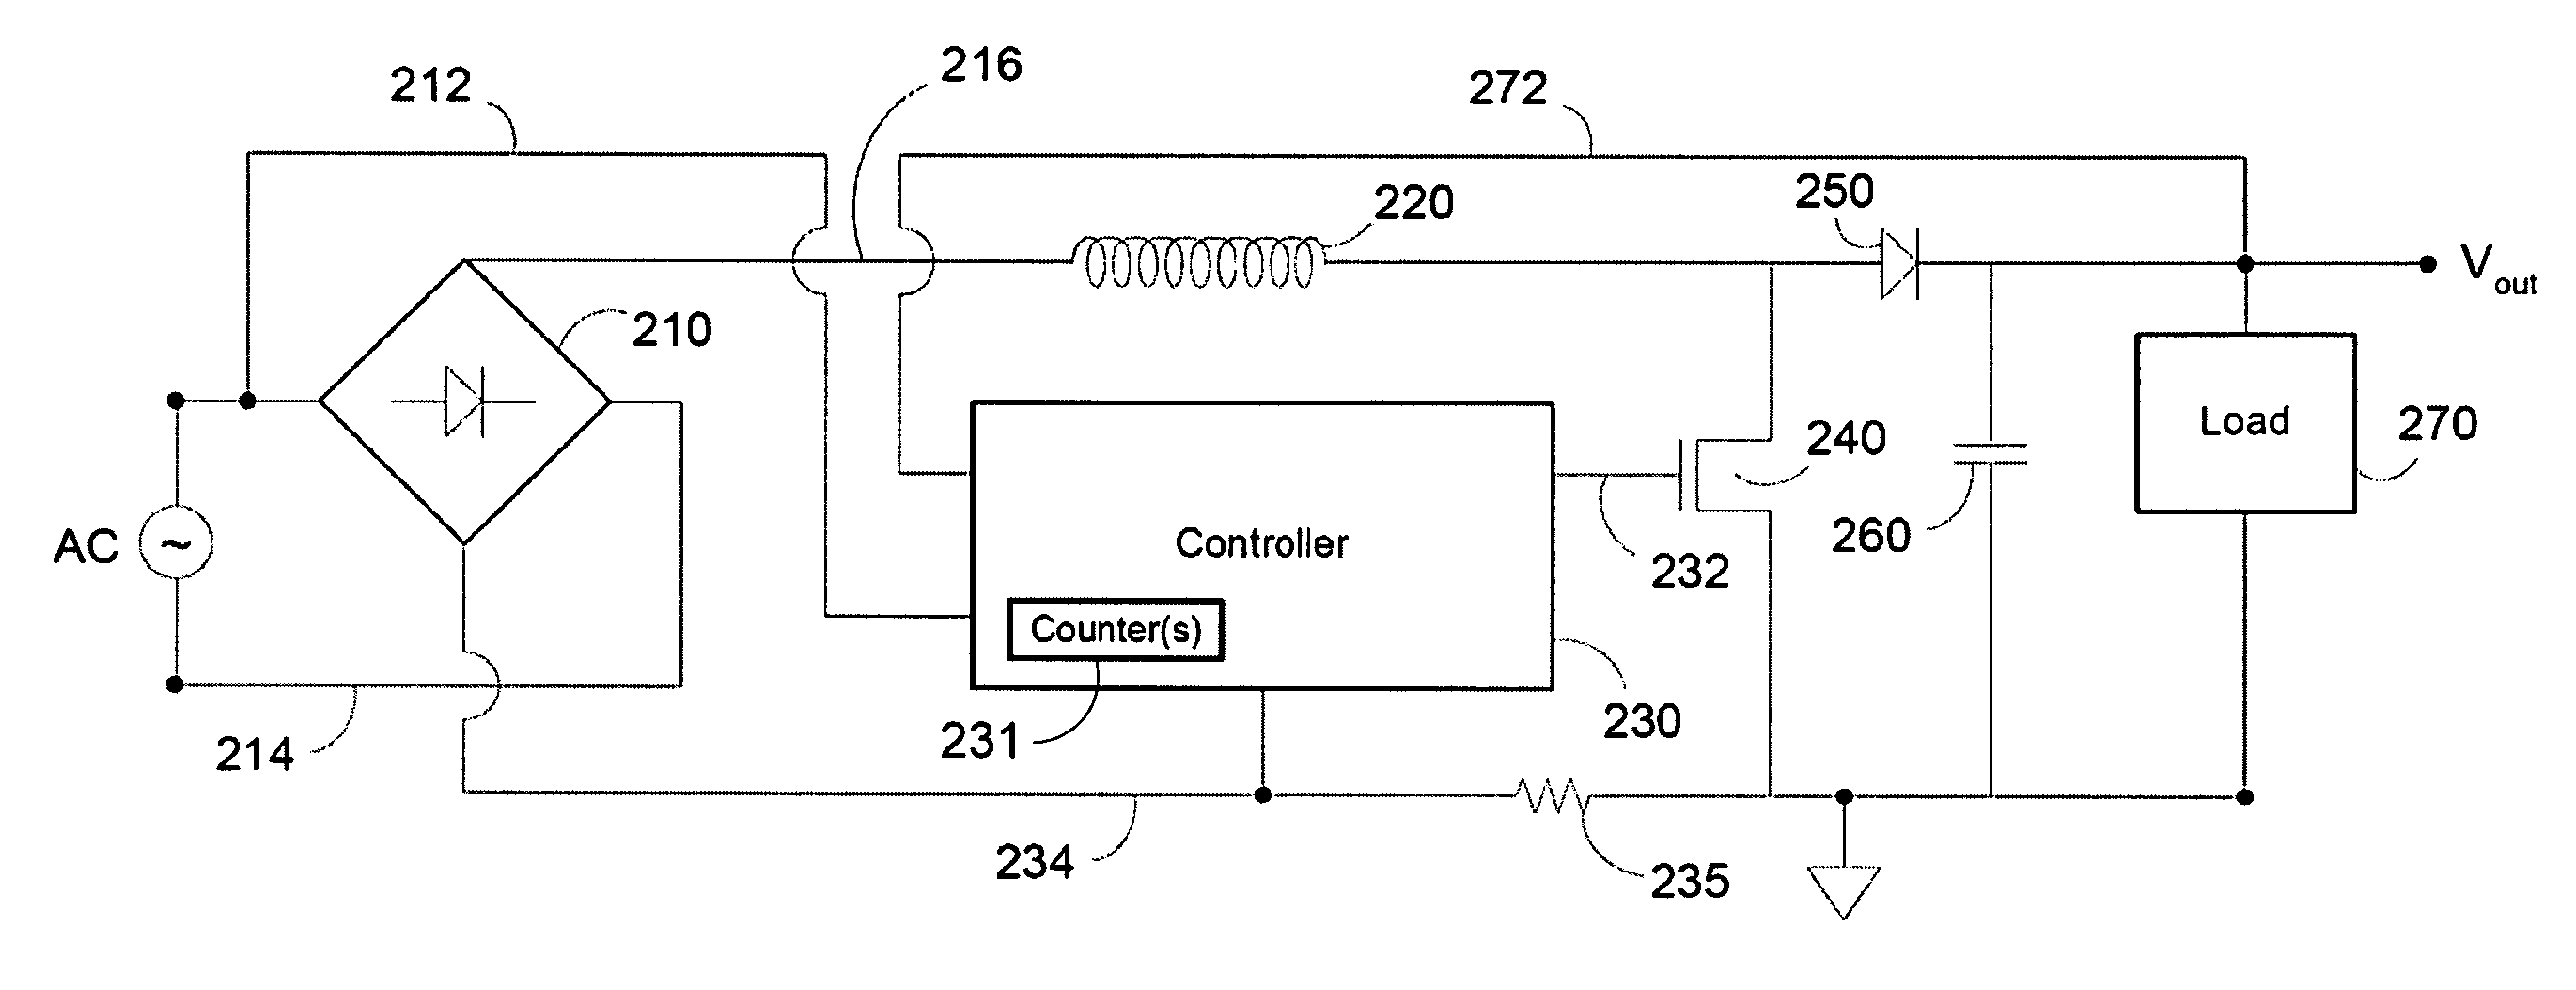 Circuits, systems, methods, and software for power factor correction and/or control